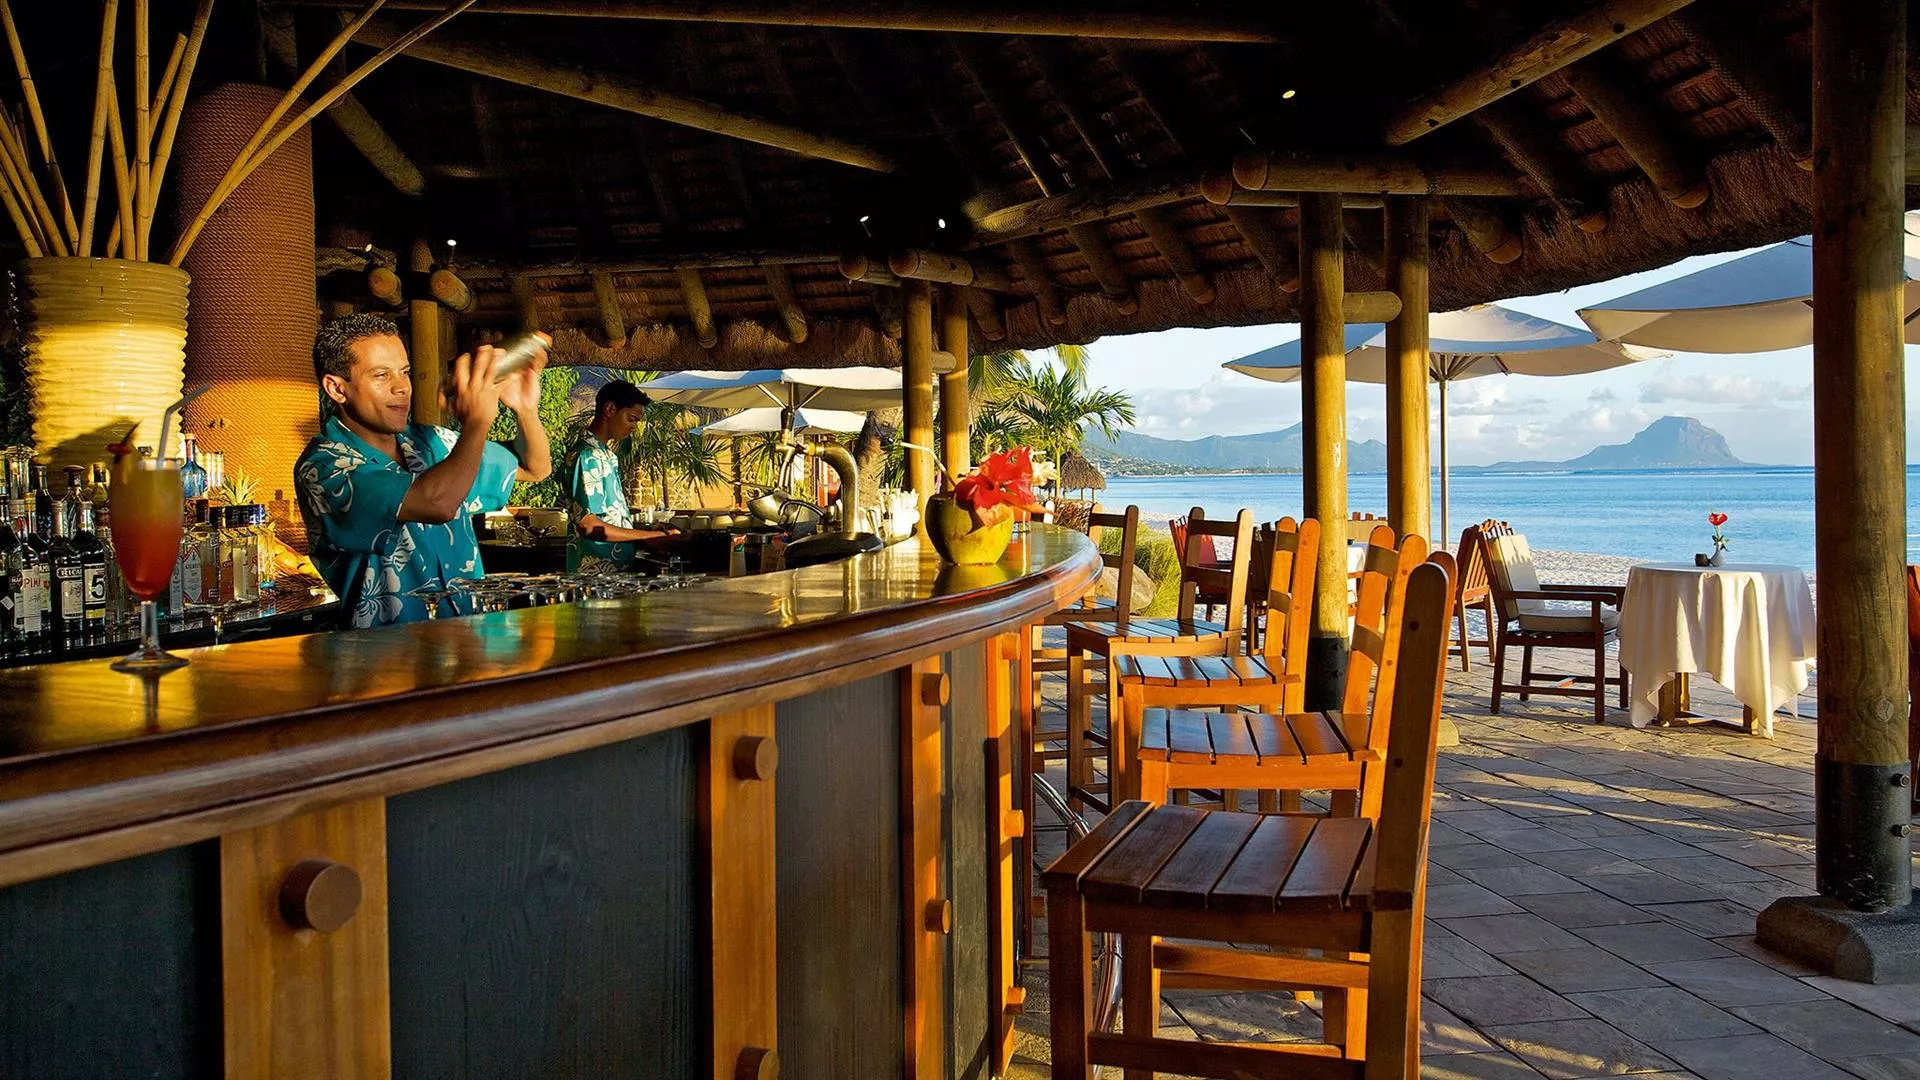 Tiger Reef Beach Bar & Grill in Namibia, Africa | Bars - Rated 3.5